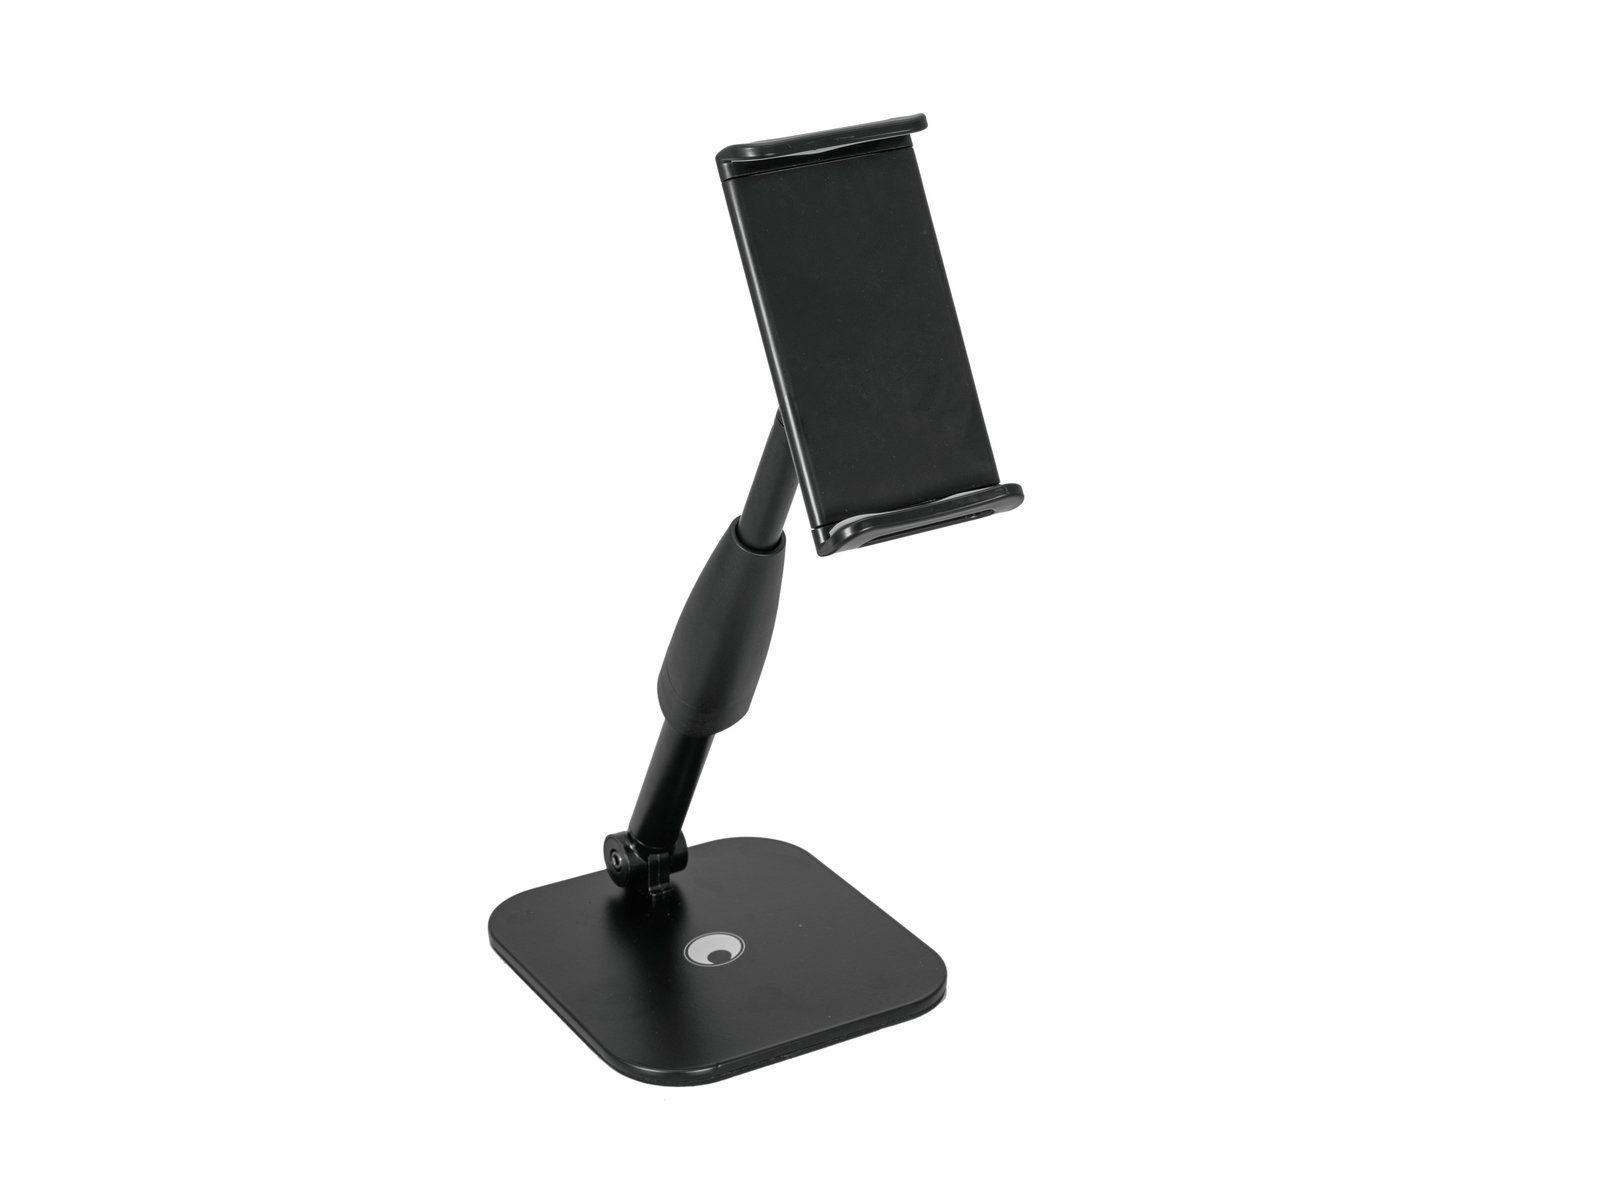 Omnitronic HTS-2 Smartphone and Tablet Stand